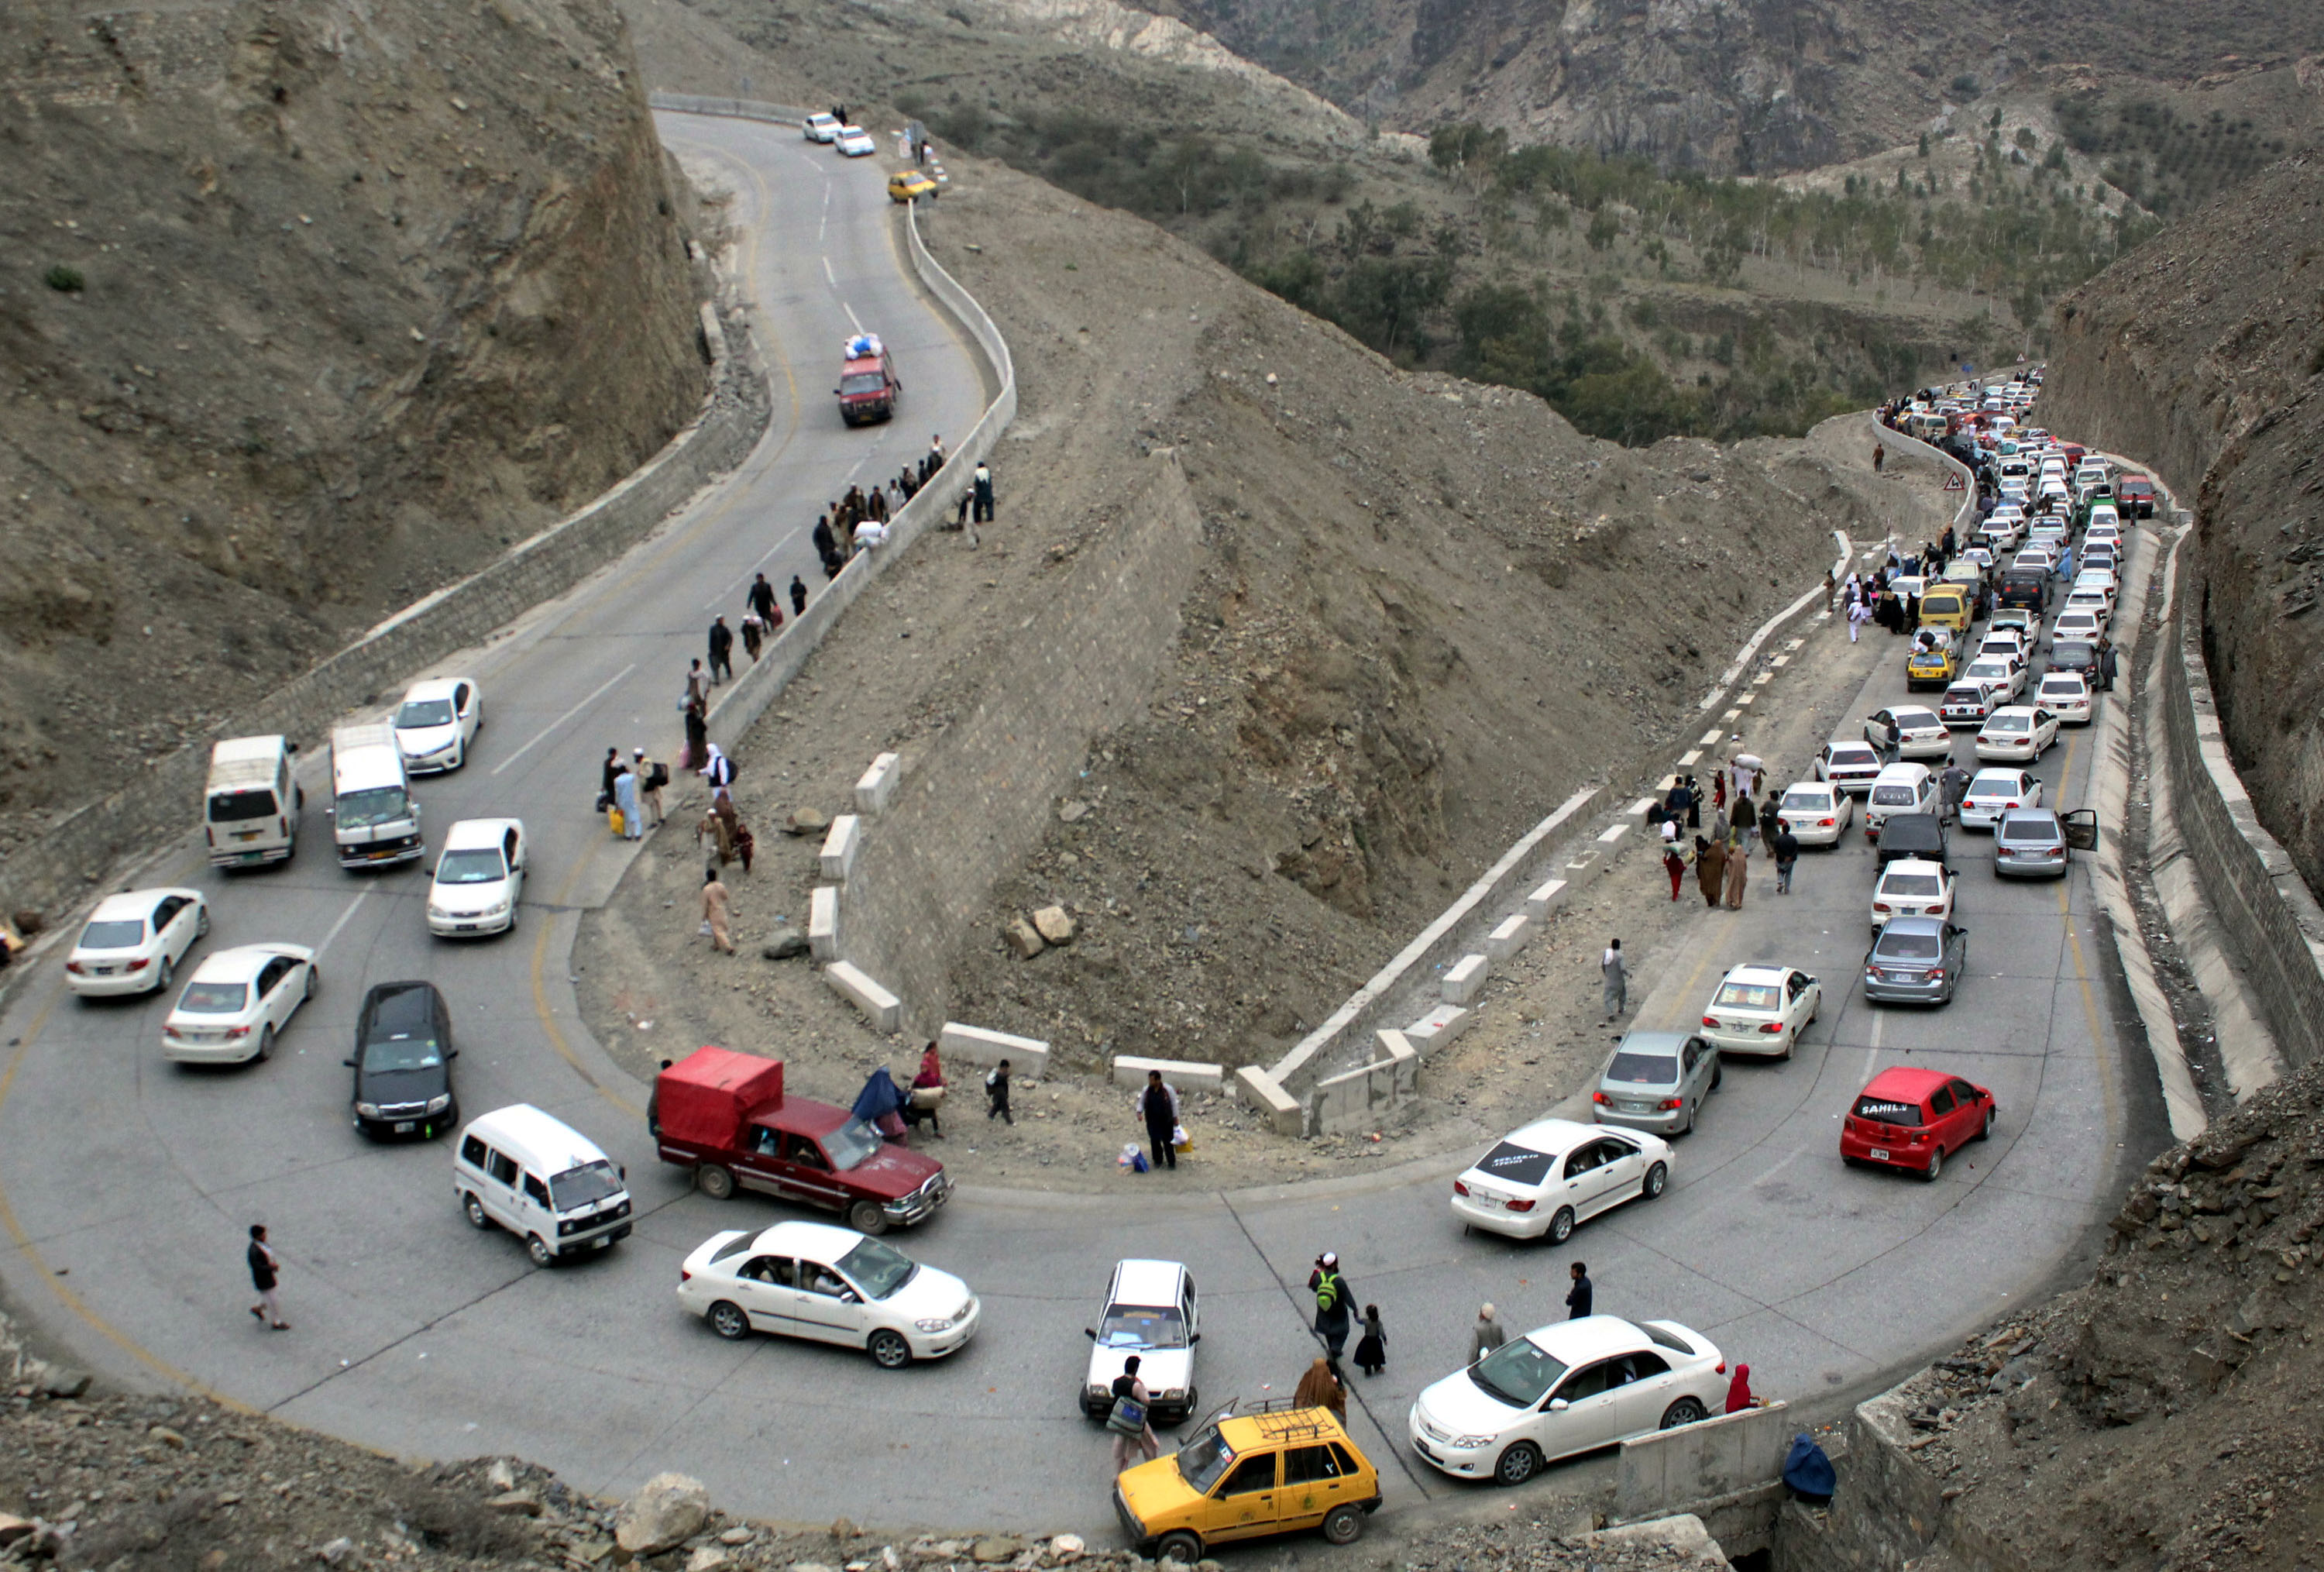 Vehicles en route to Afghanistan line up near the Pakistani-Afghan border in northwest Pakistan's Torkham on March 7, 2017 (Sidique—Xinhua News Agency/Getty Images)